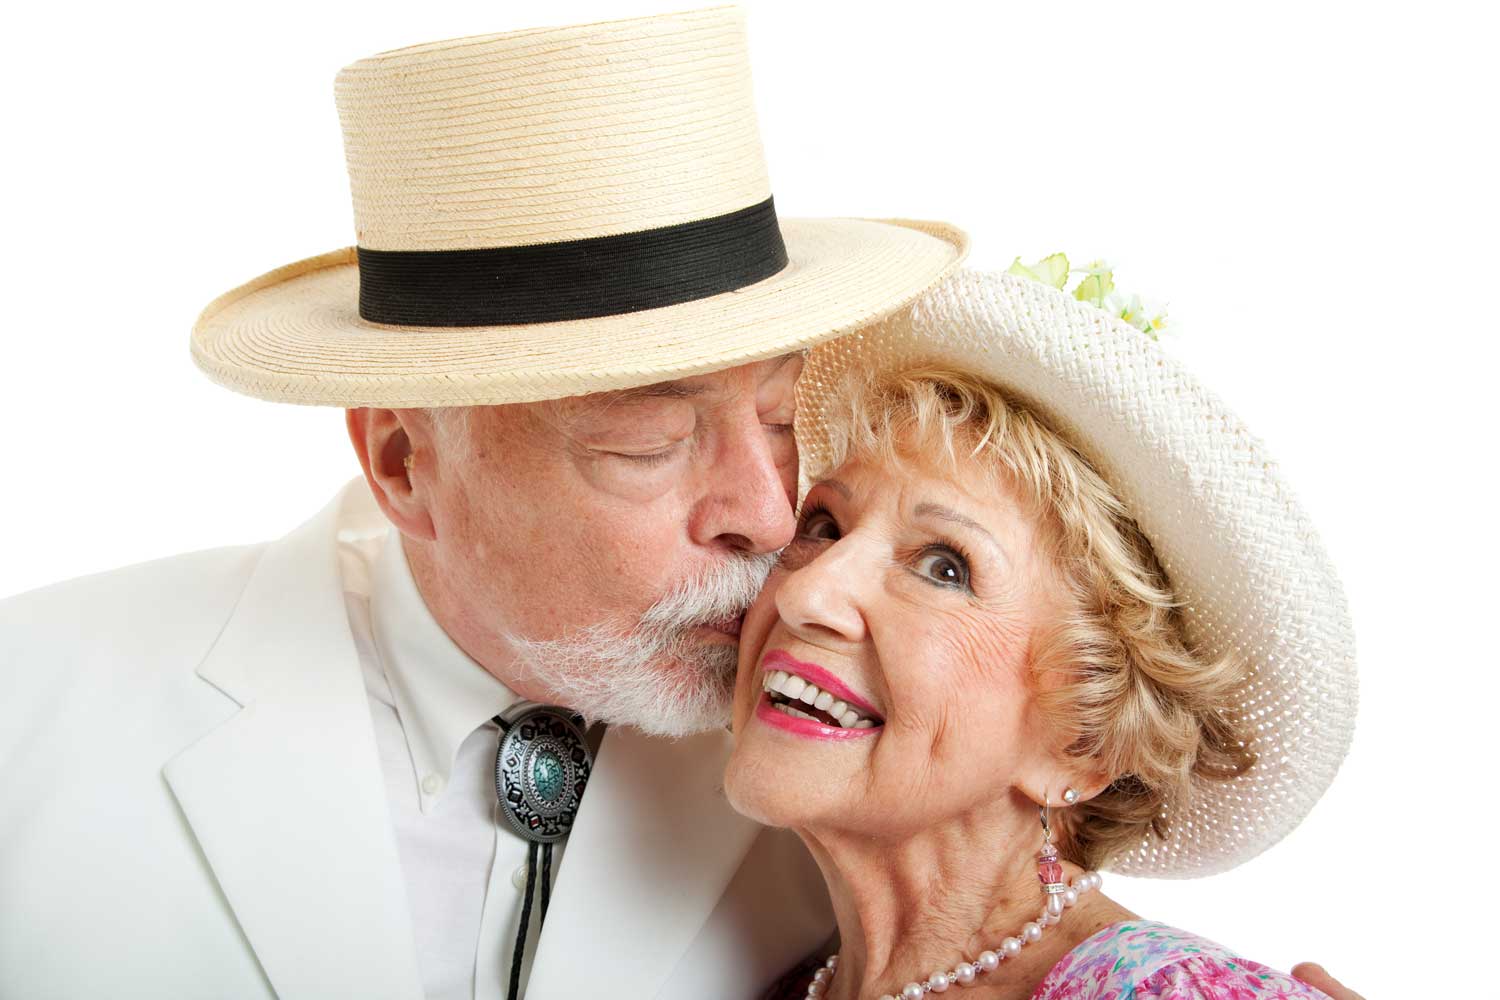 A smiling senior woman in Sunday dress kissed on the cheek by a senior man